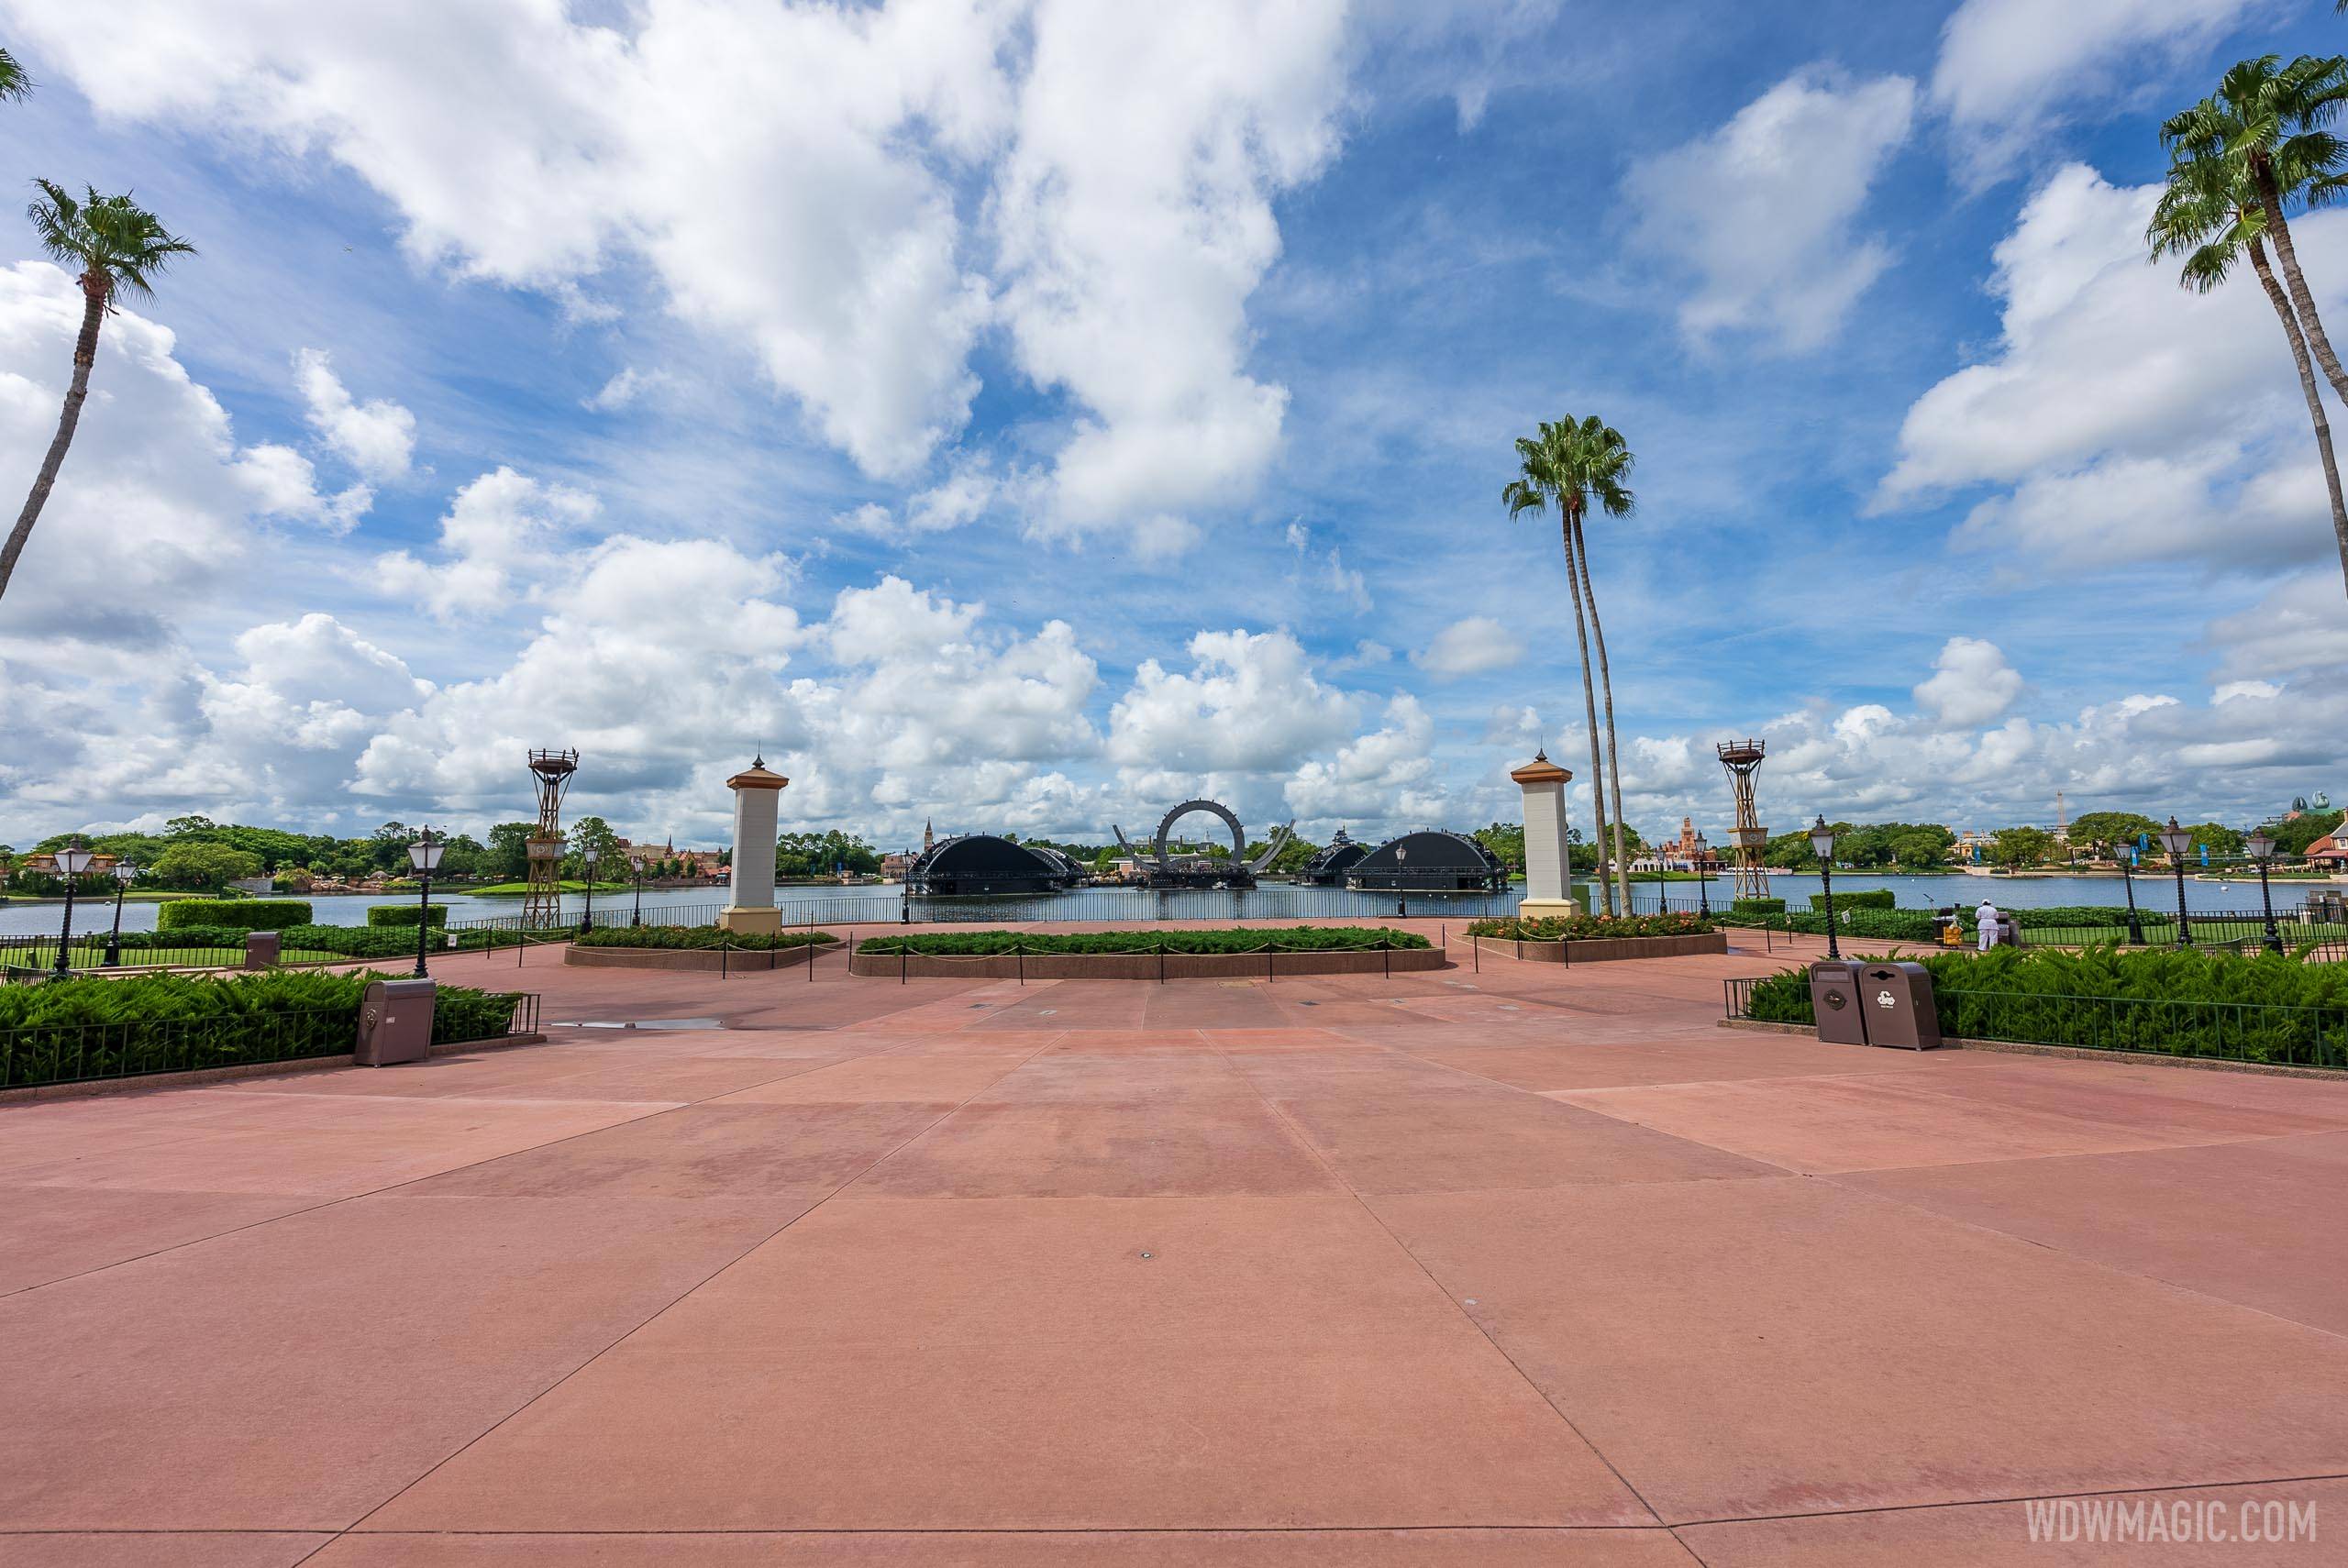 Harmonious show programming wraps up and tents removed ahead of EPCOT Forever 2.0 debut tonight